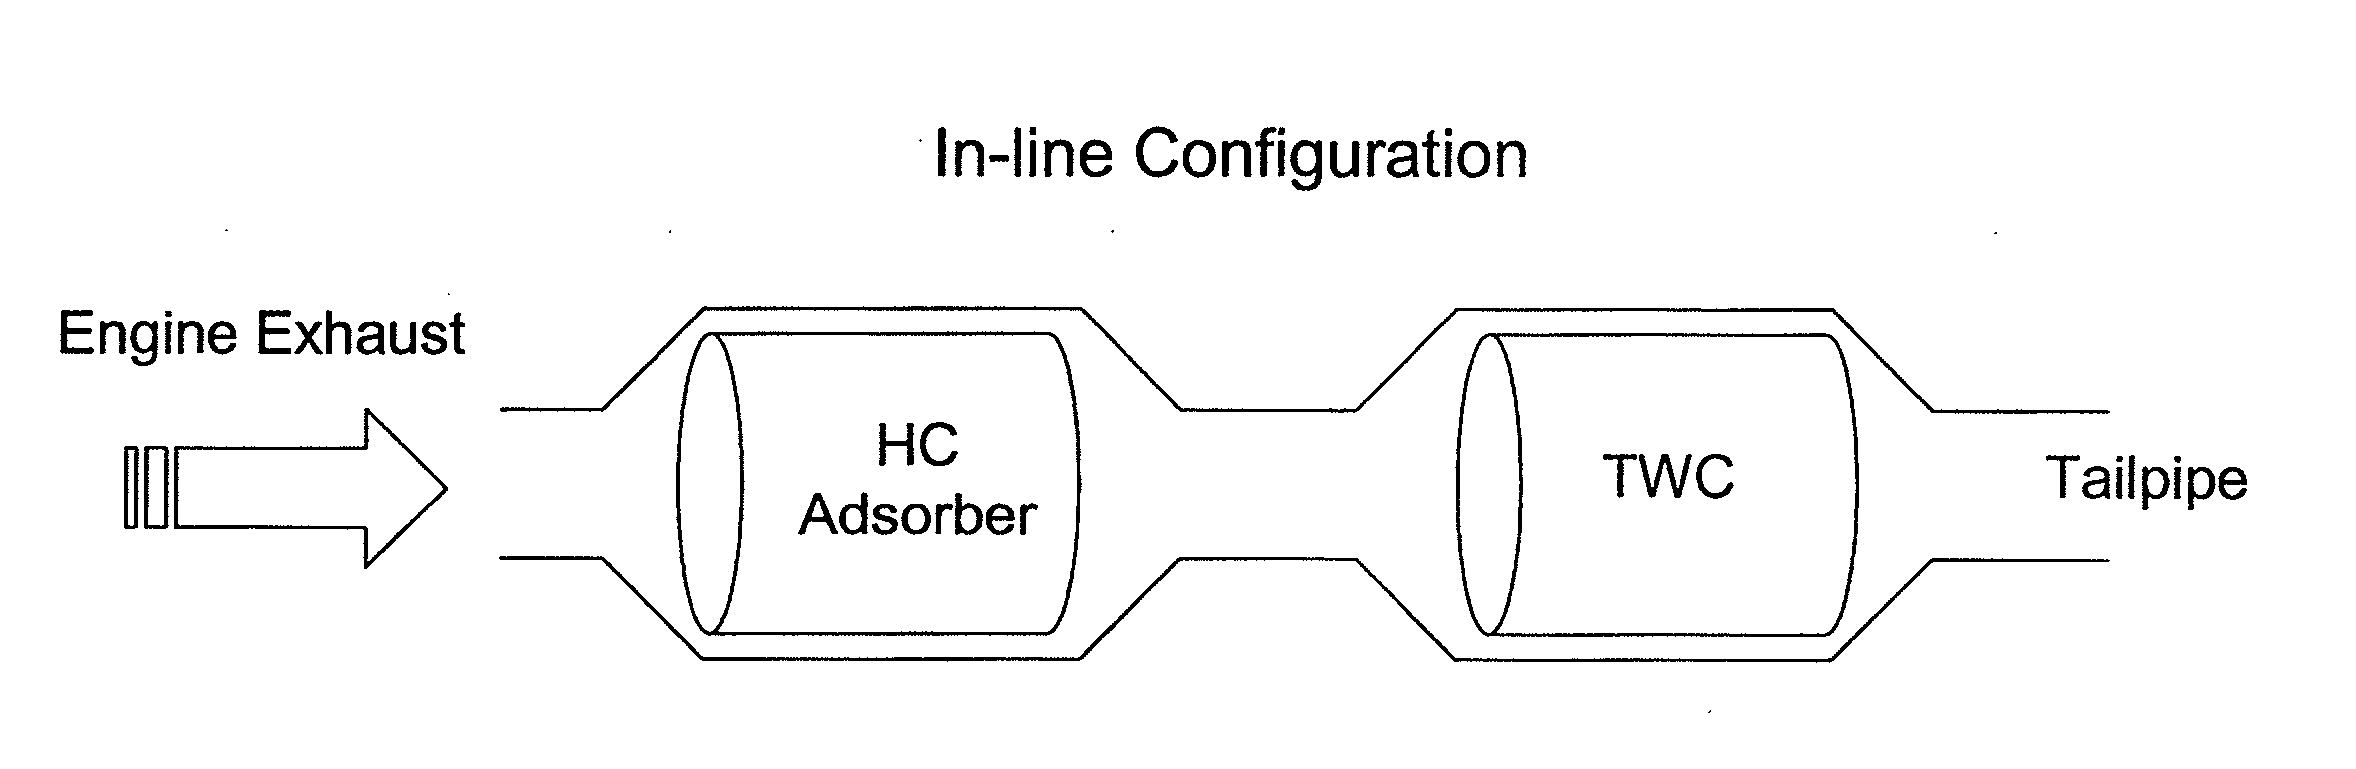 HC Adsorber with OBD Capability